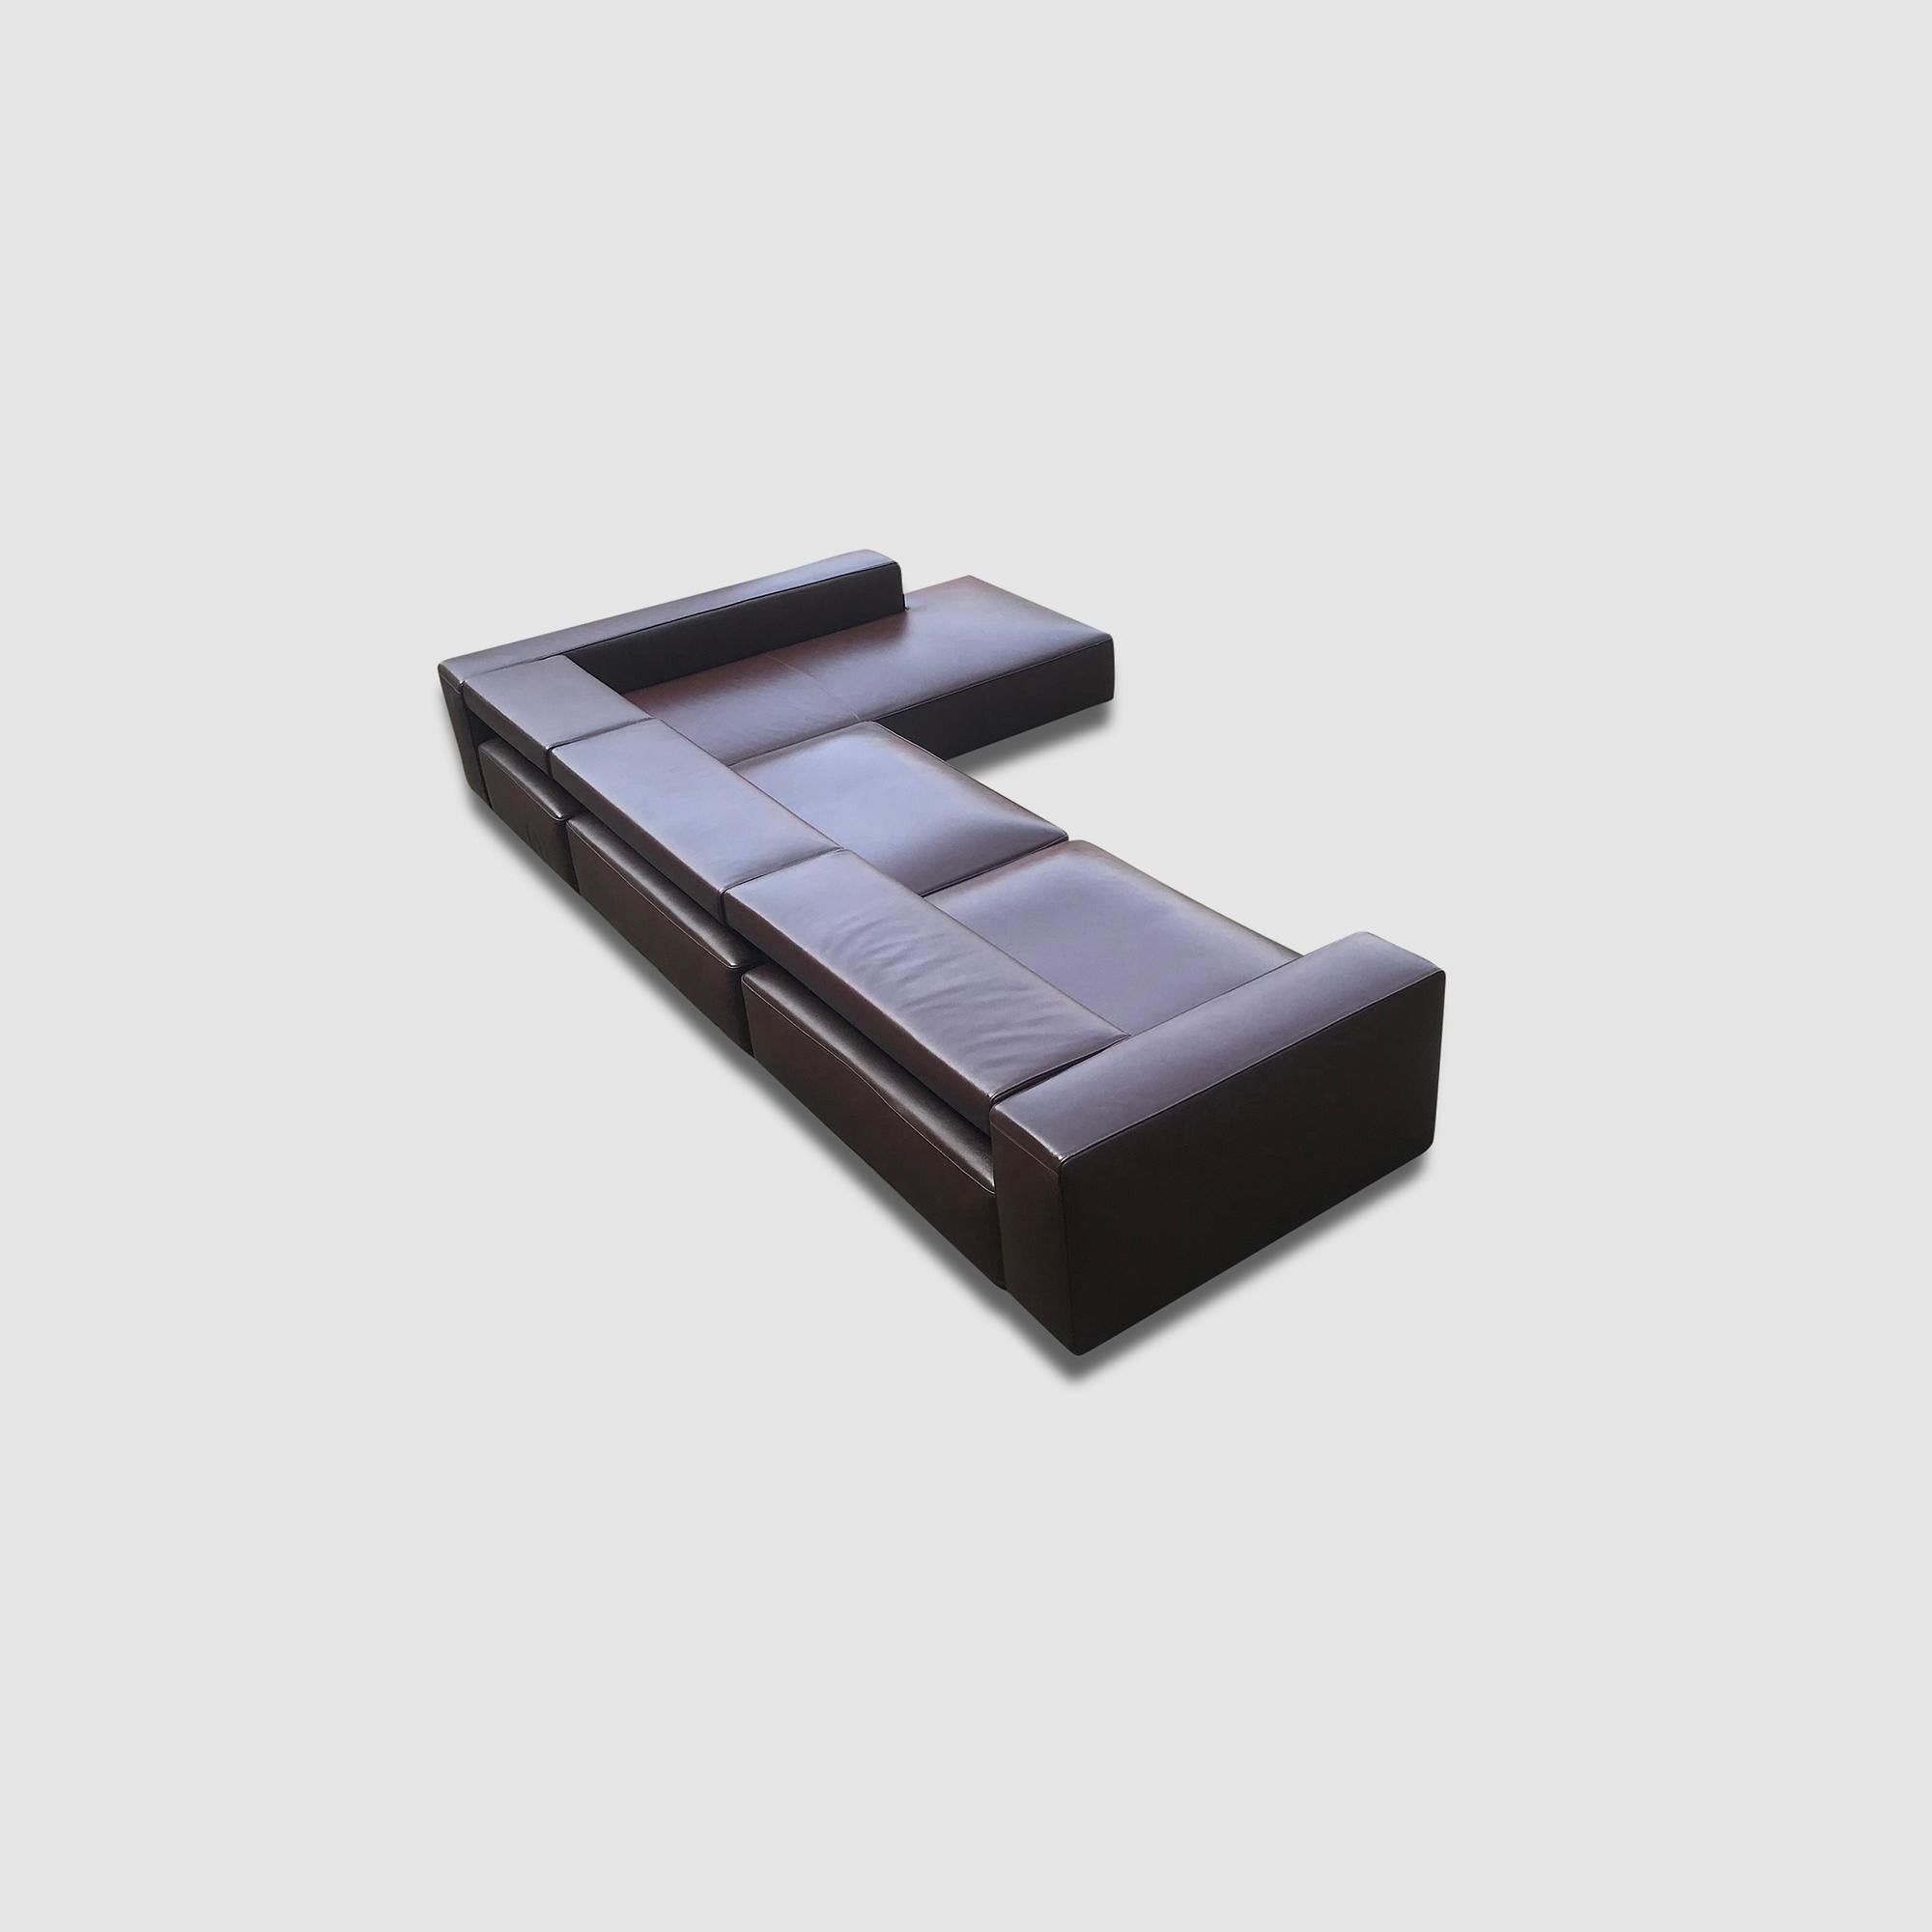 Modern Modular Leather Andy Landscape Sofa by Paolo Piva for B&B Italia 2013